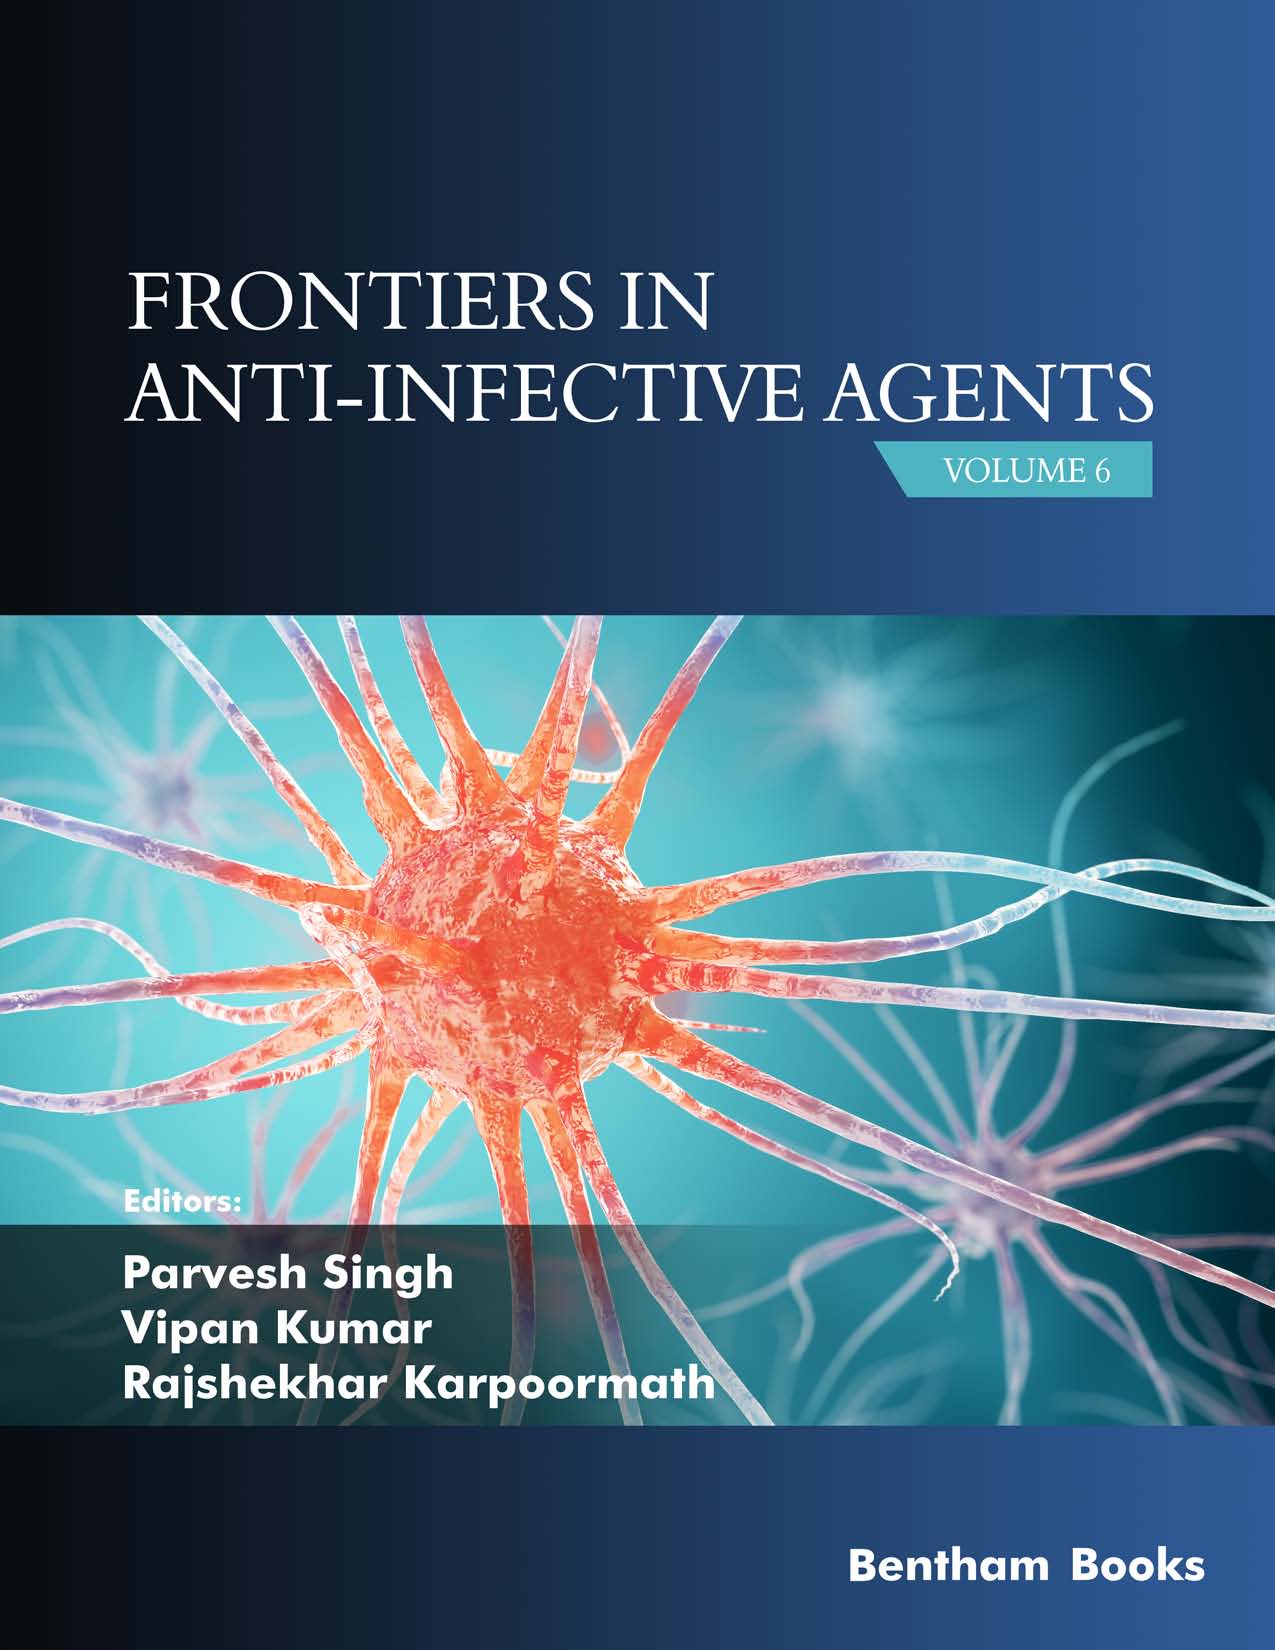 Frontiers in Anti-infective Agents